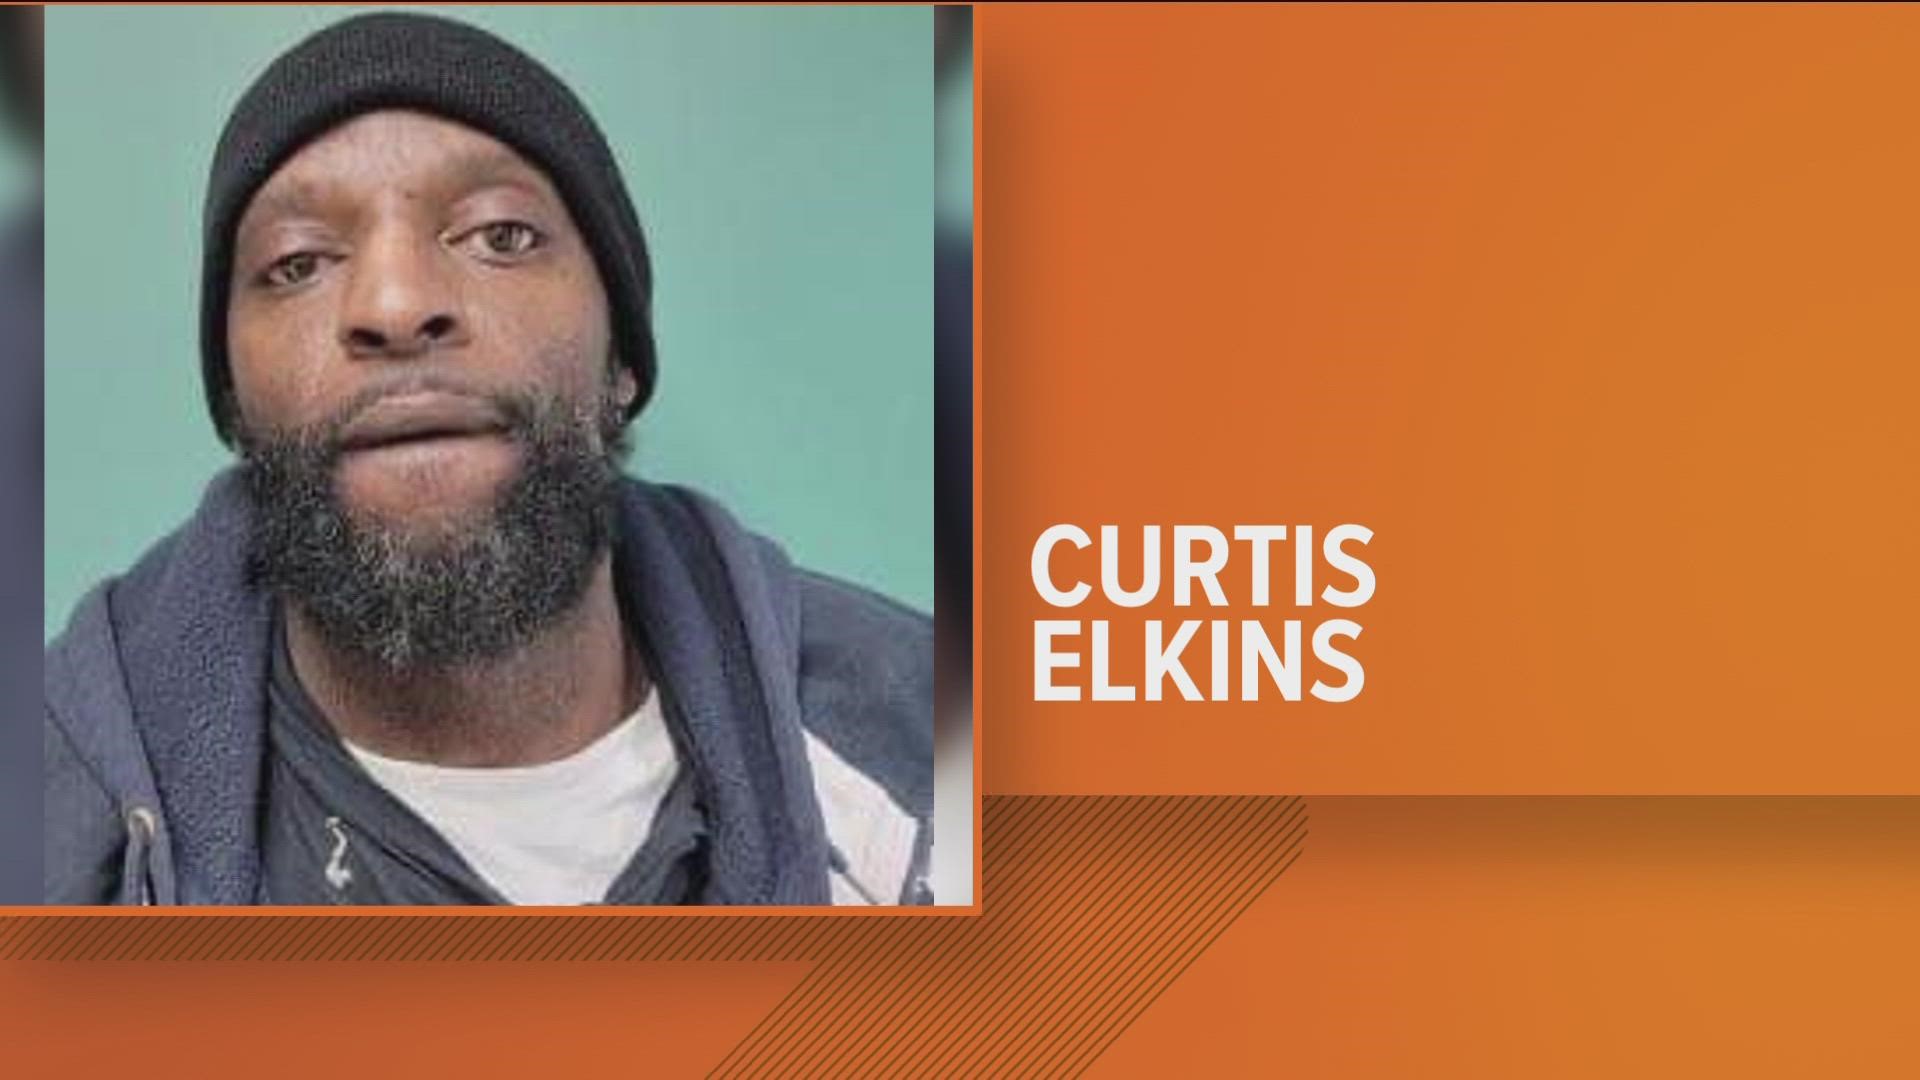 Curtis Elkins, 42, was hiding in an apartment on Market Street in Tiffin. He also had charges pending on two counts of felonious assault.